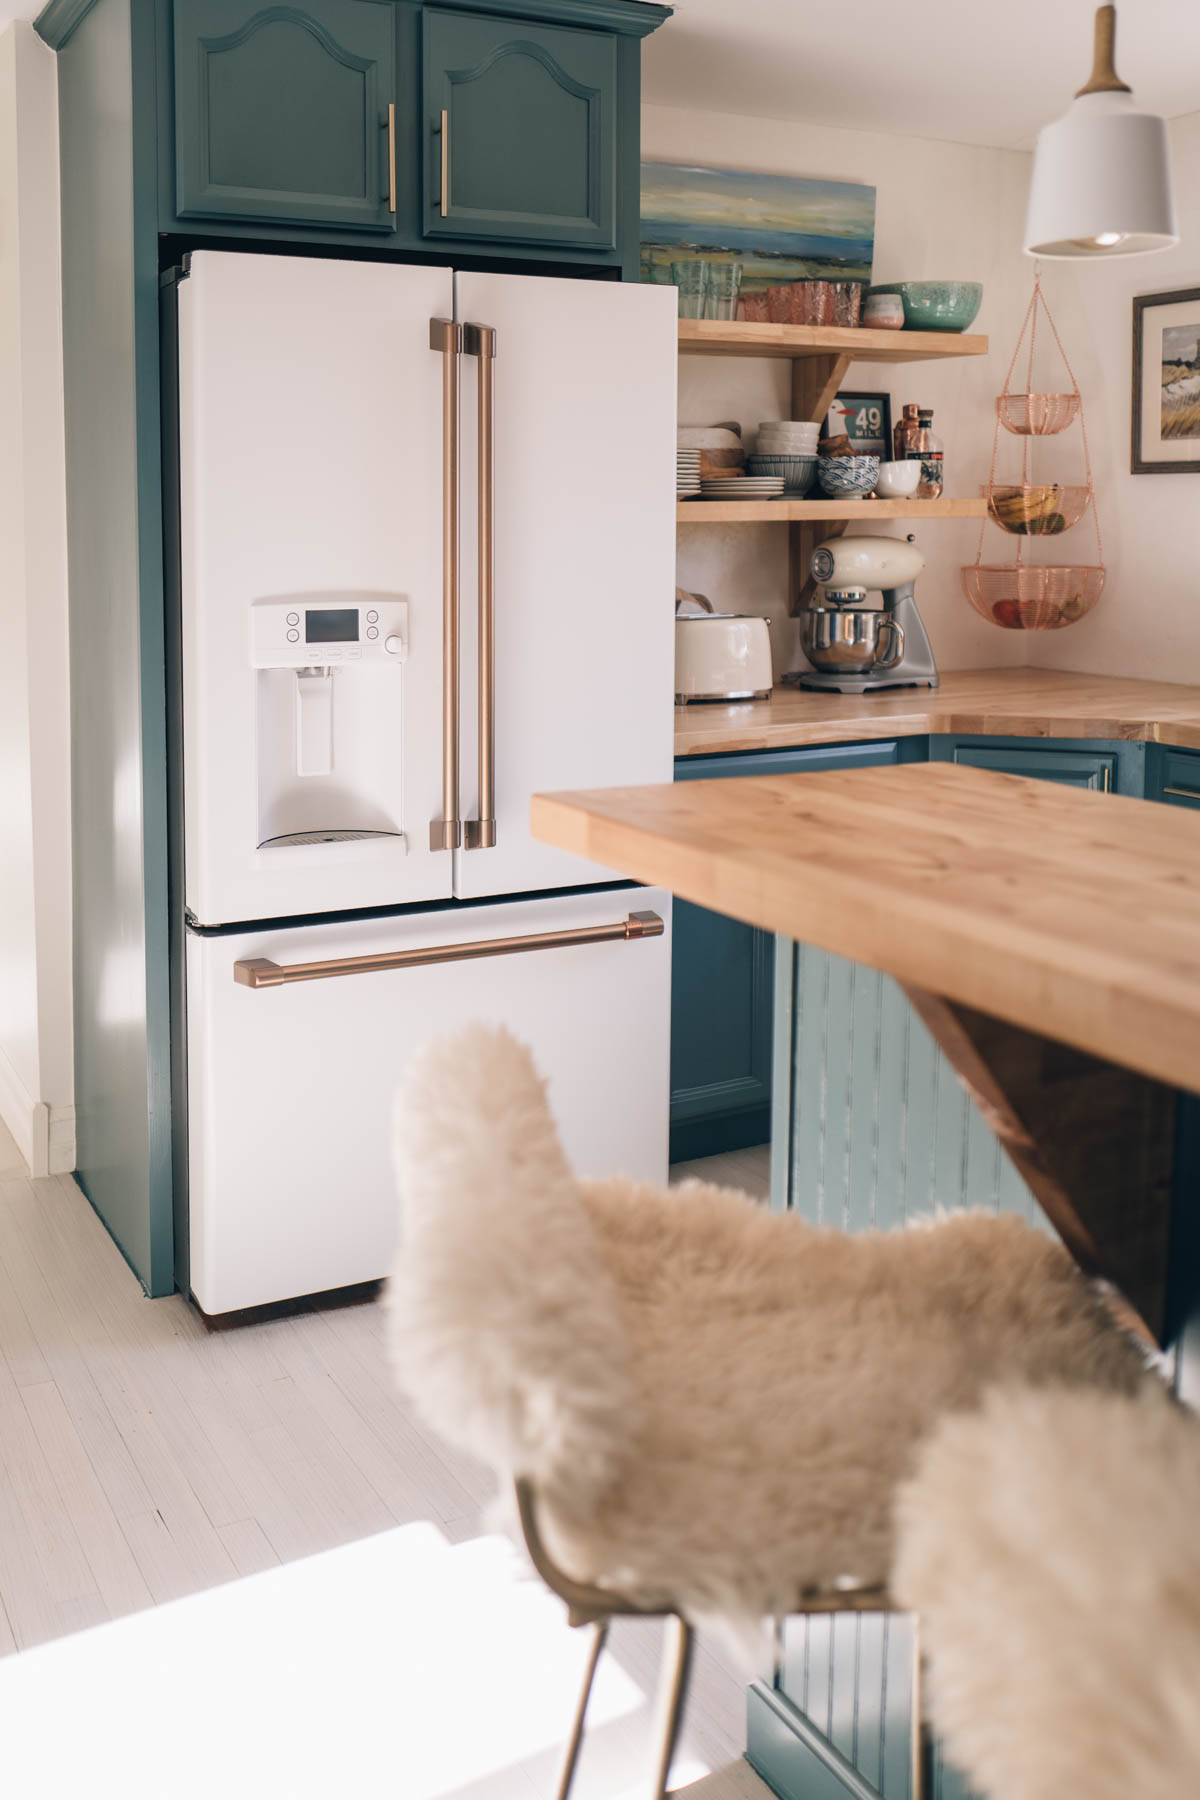 2019 kitchen design trends, warm hardware finishes and bold cabinetry colors in blue feauturing Cafe Appliances in Matte White with Brushed Bronze Hardware.